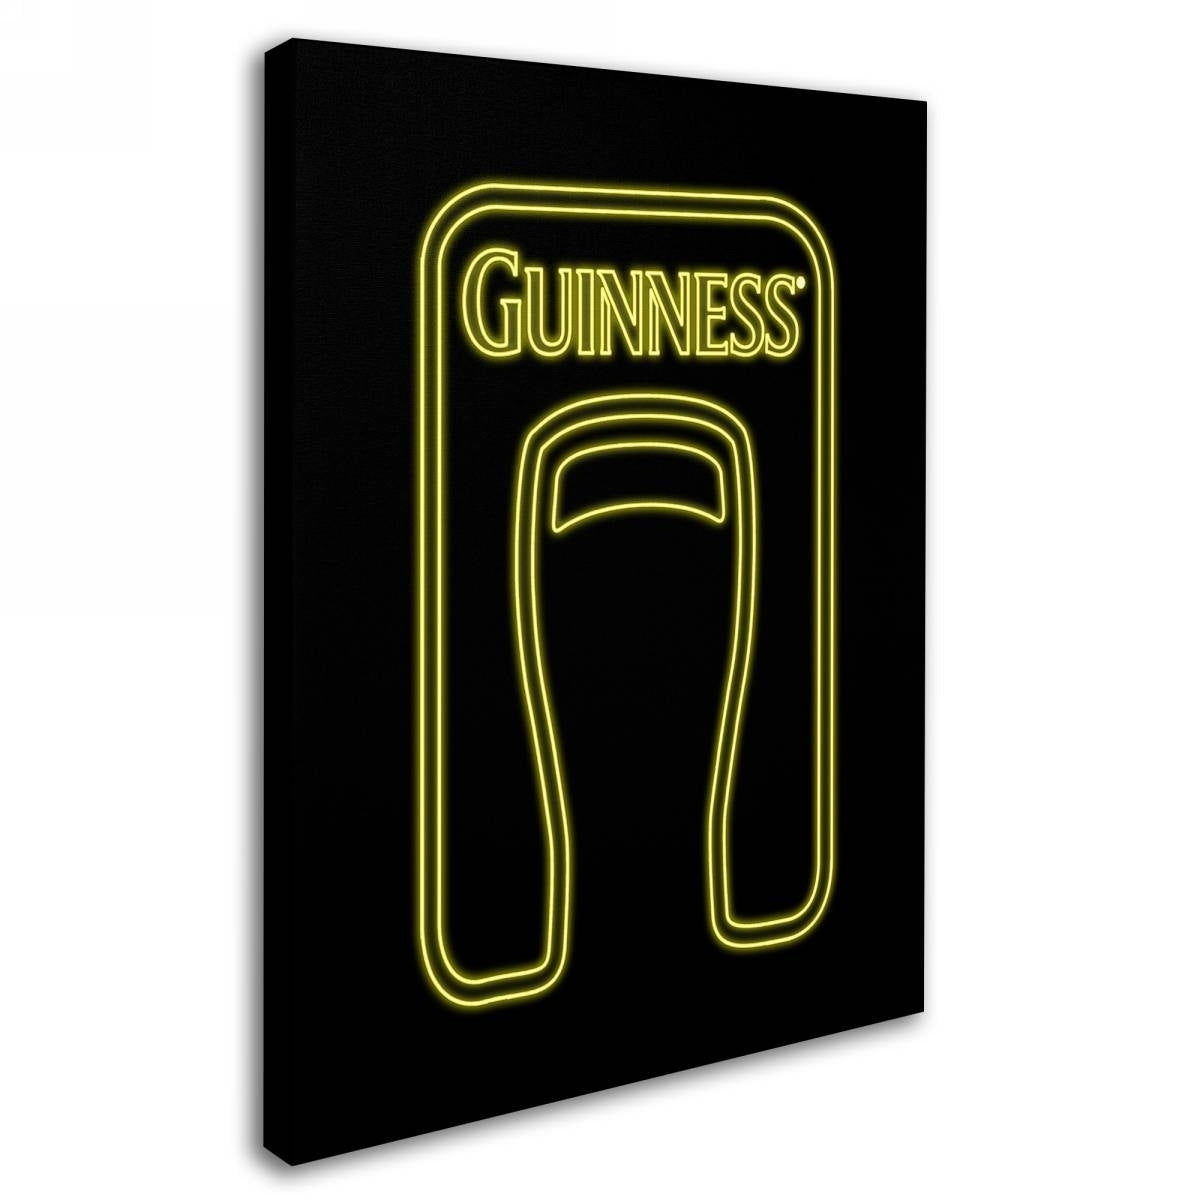 A neon Guinness Brewery 'Guinness VI' Canvas Art sign on a black background.